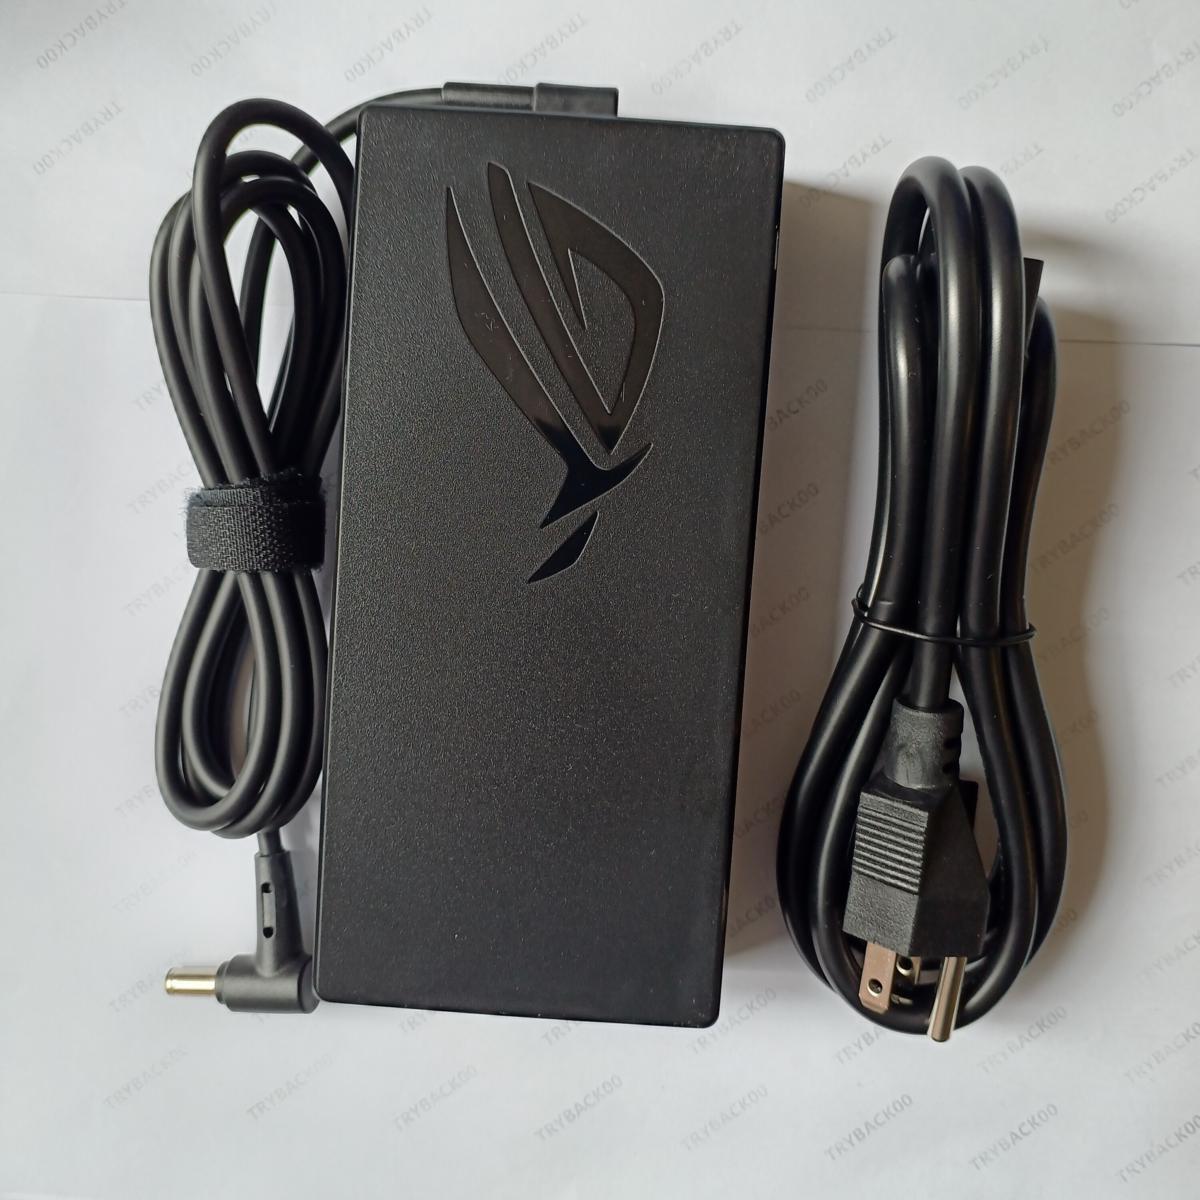 200W AC Power Adapter Charger For ASUS TUF Gaming Rog Zephyrus ADP-200JB D OEM